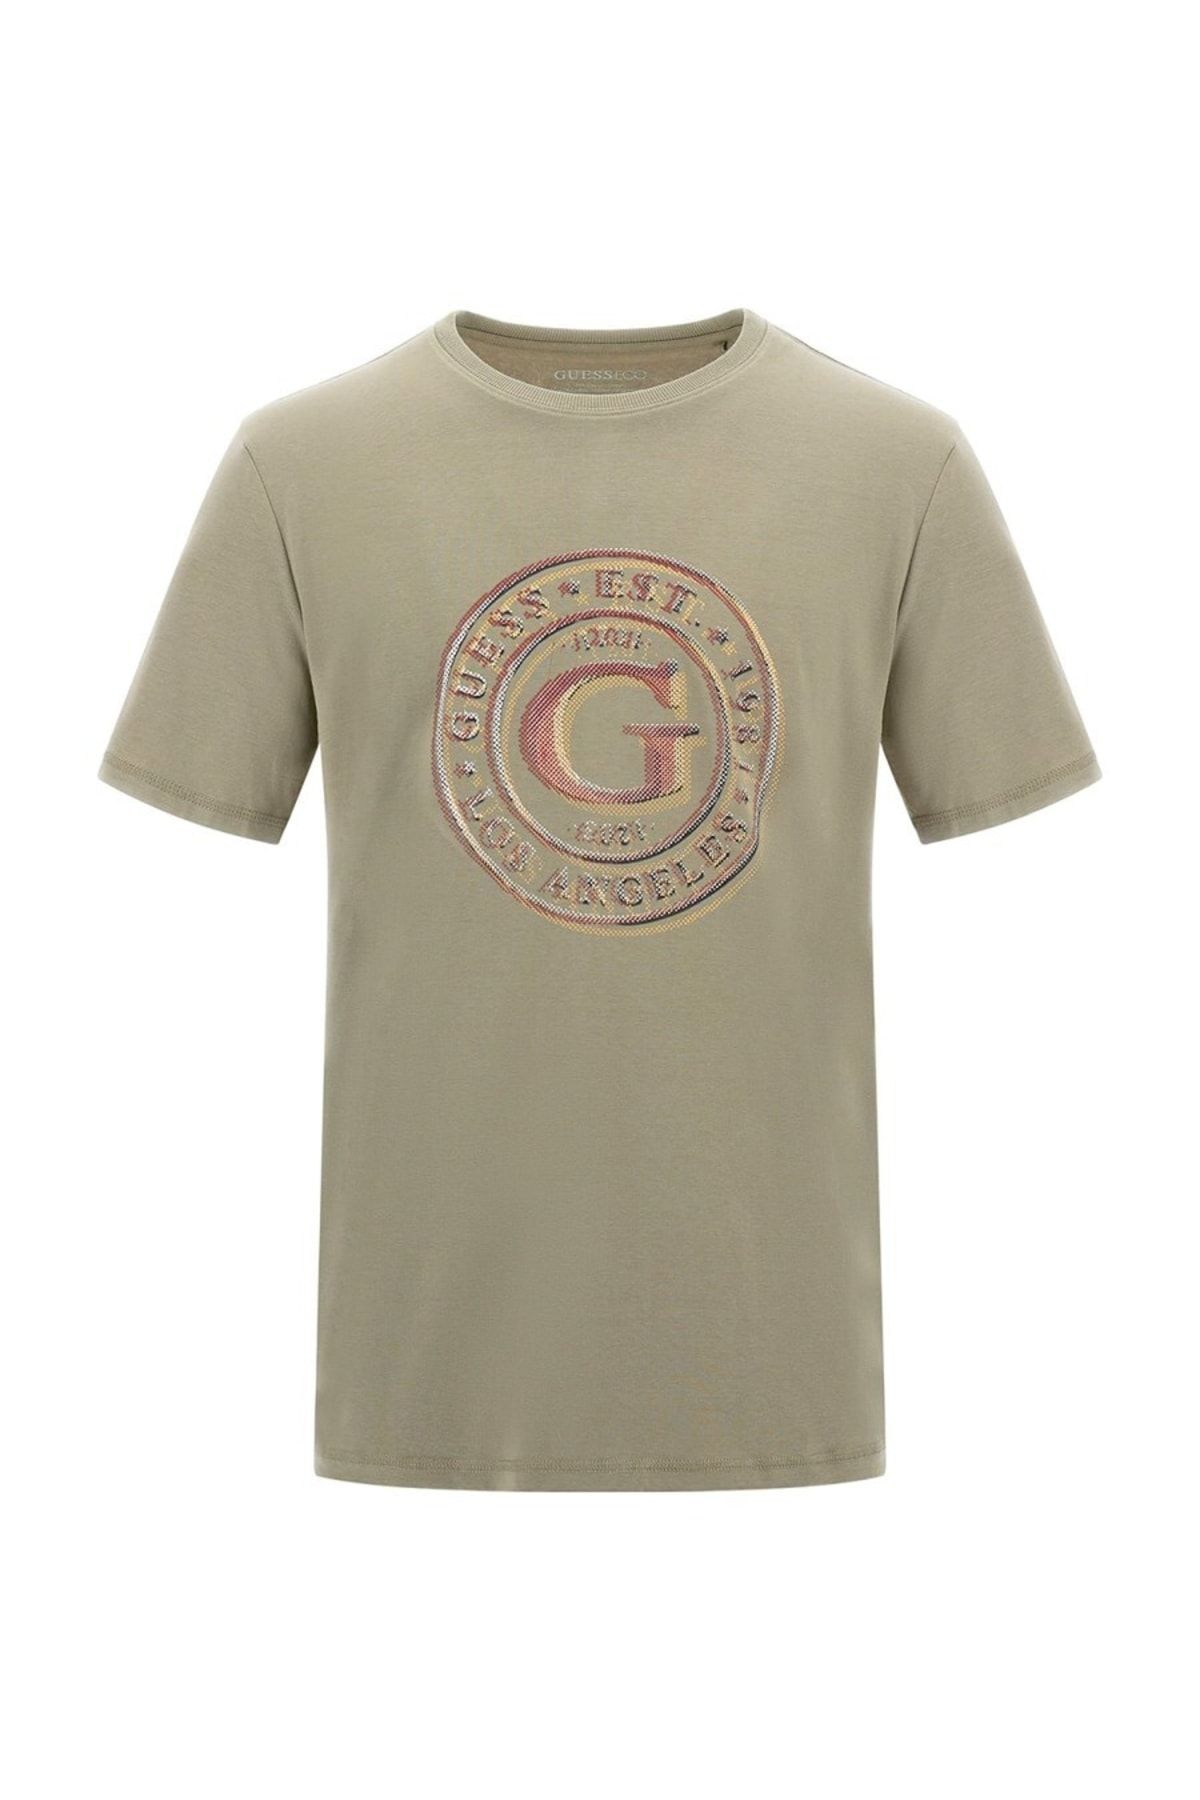 Guess Ss Cn G Round Logo T